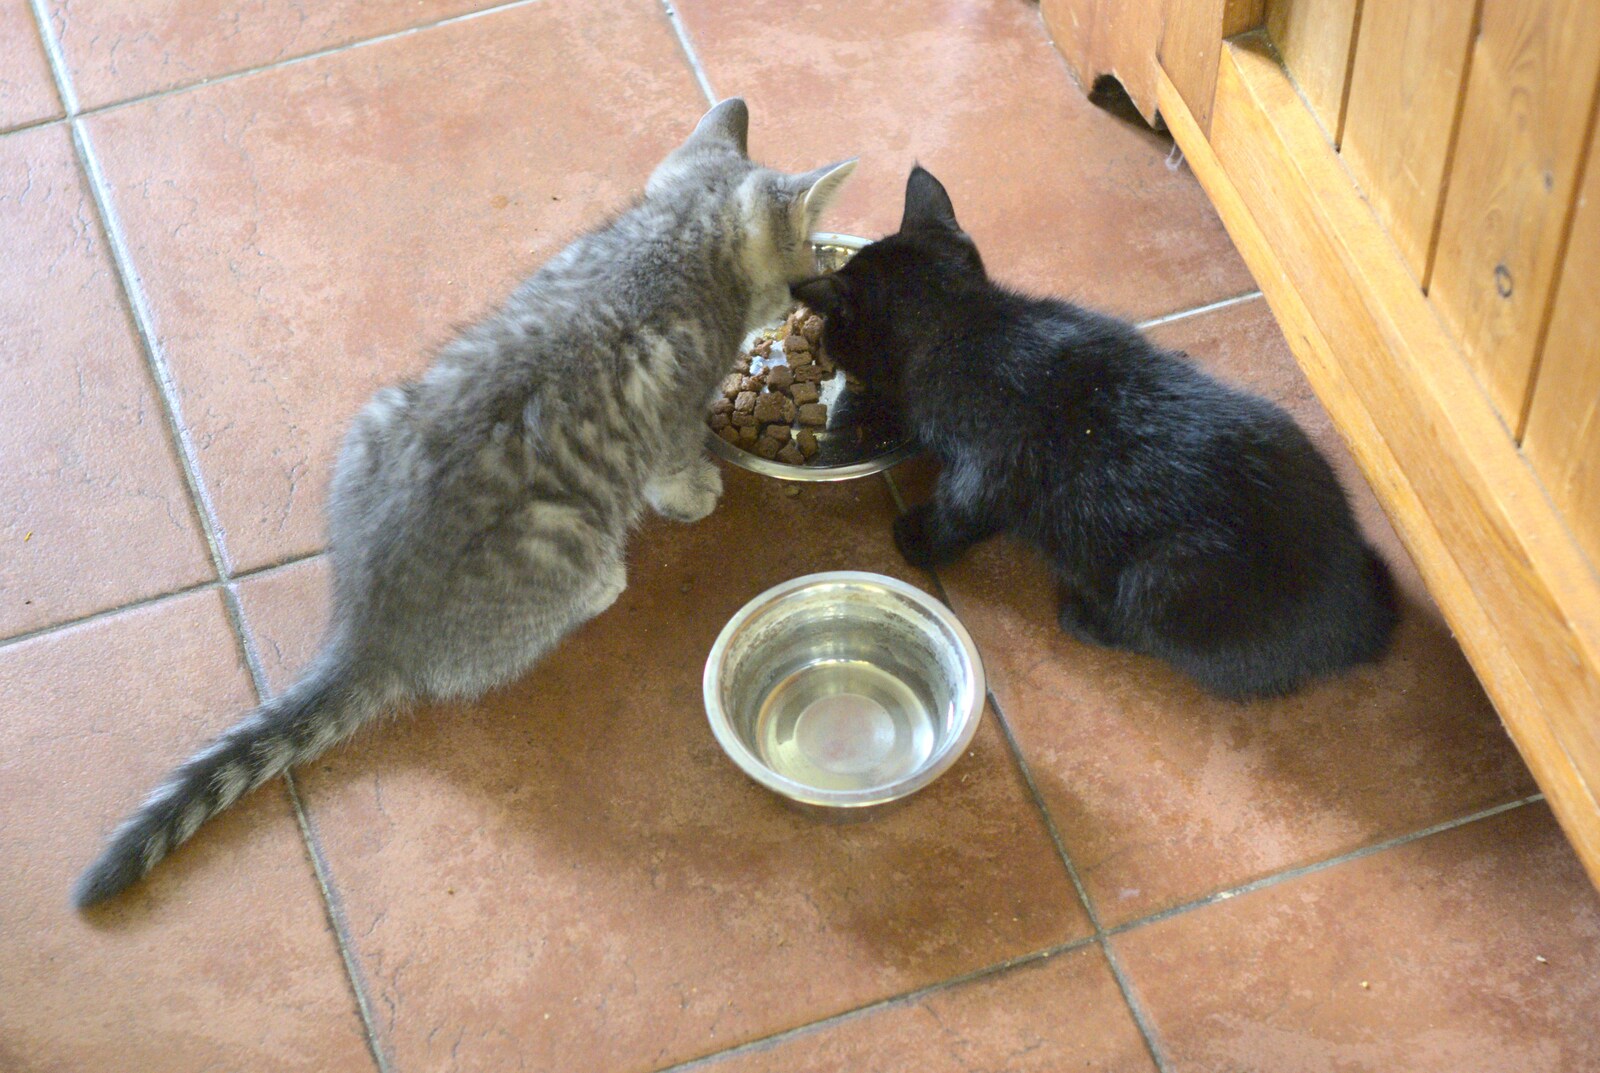 The kittens eat Mog Nosh from New Kittens and Moonlit Fields, Brome, Suffolk - 11th August 2009